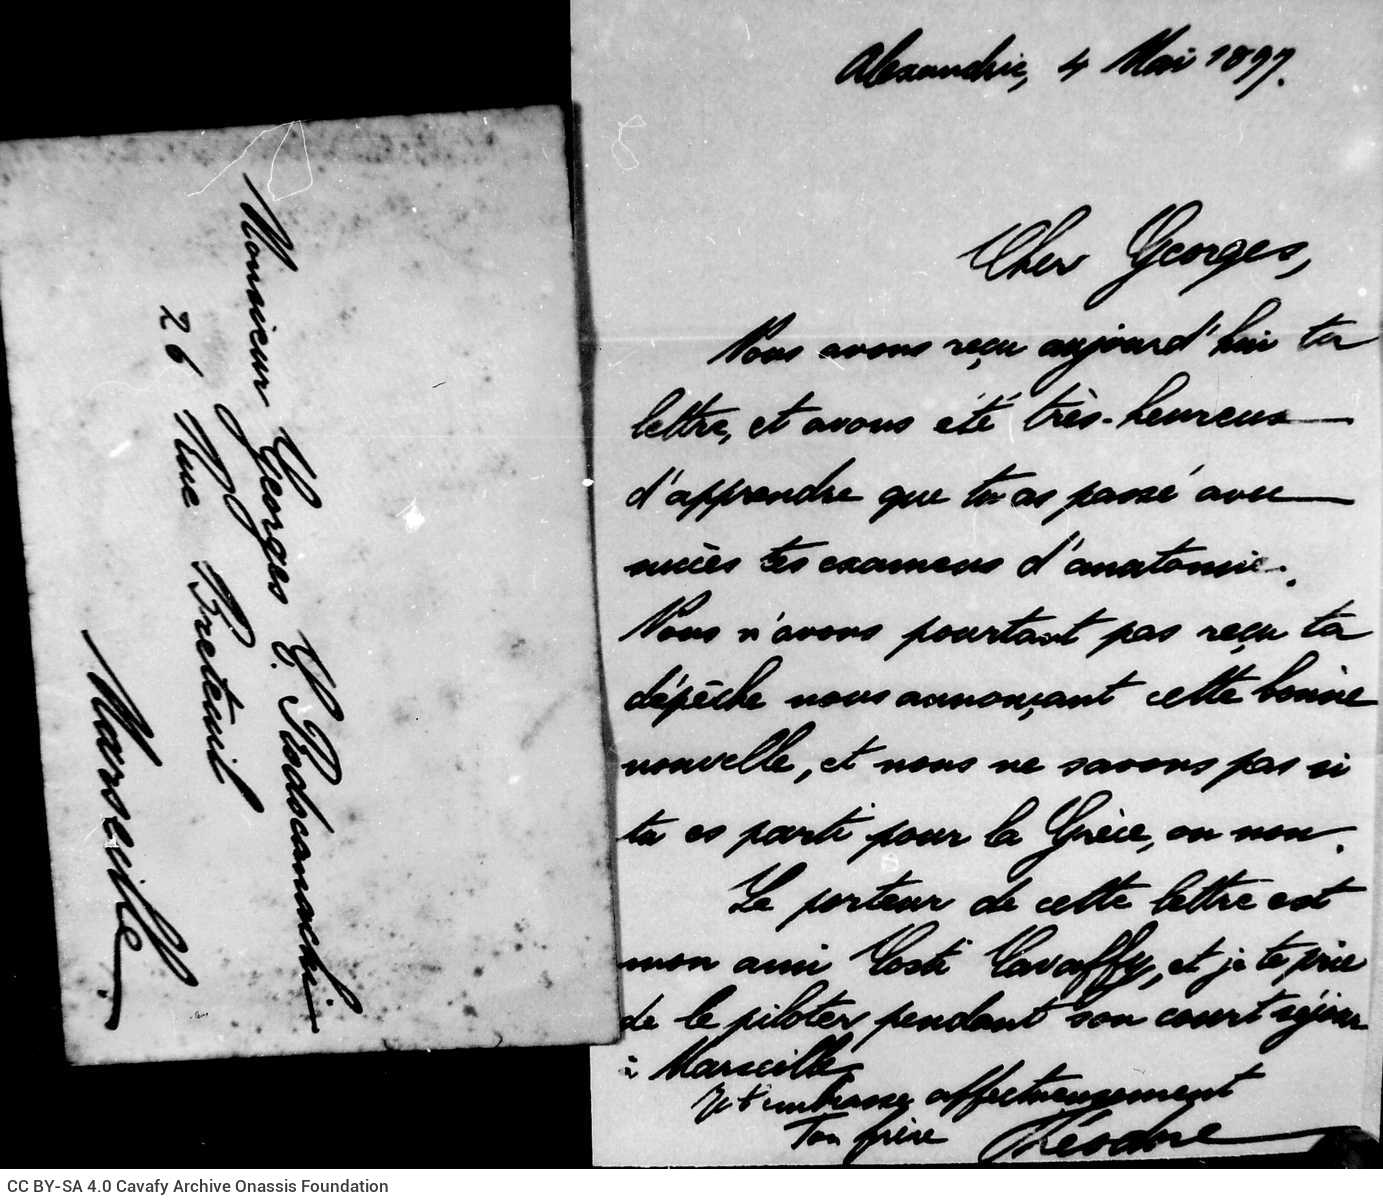 Handwritten letter by Theodore C. Rodocanachi to his brother, George, on one side of a letterhead. The sender congratulate